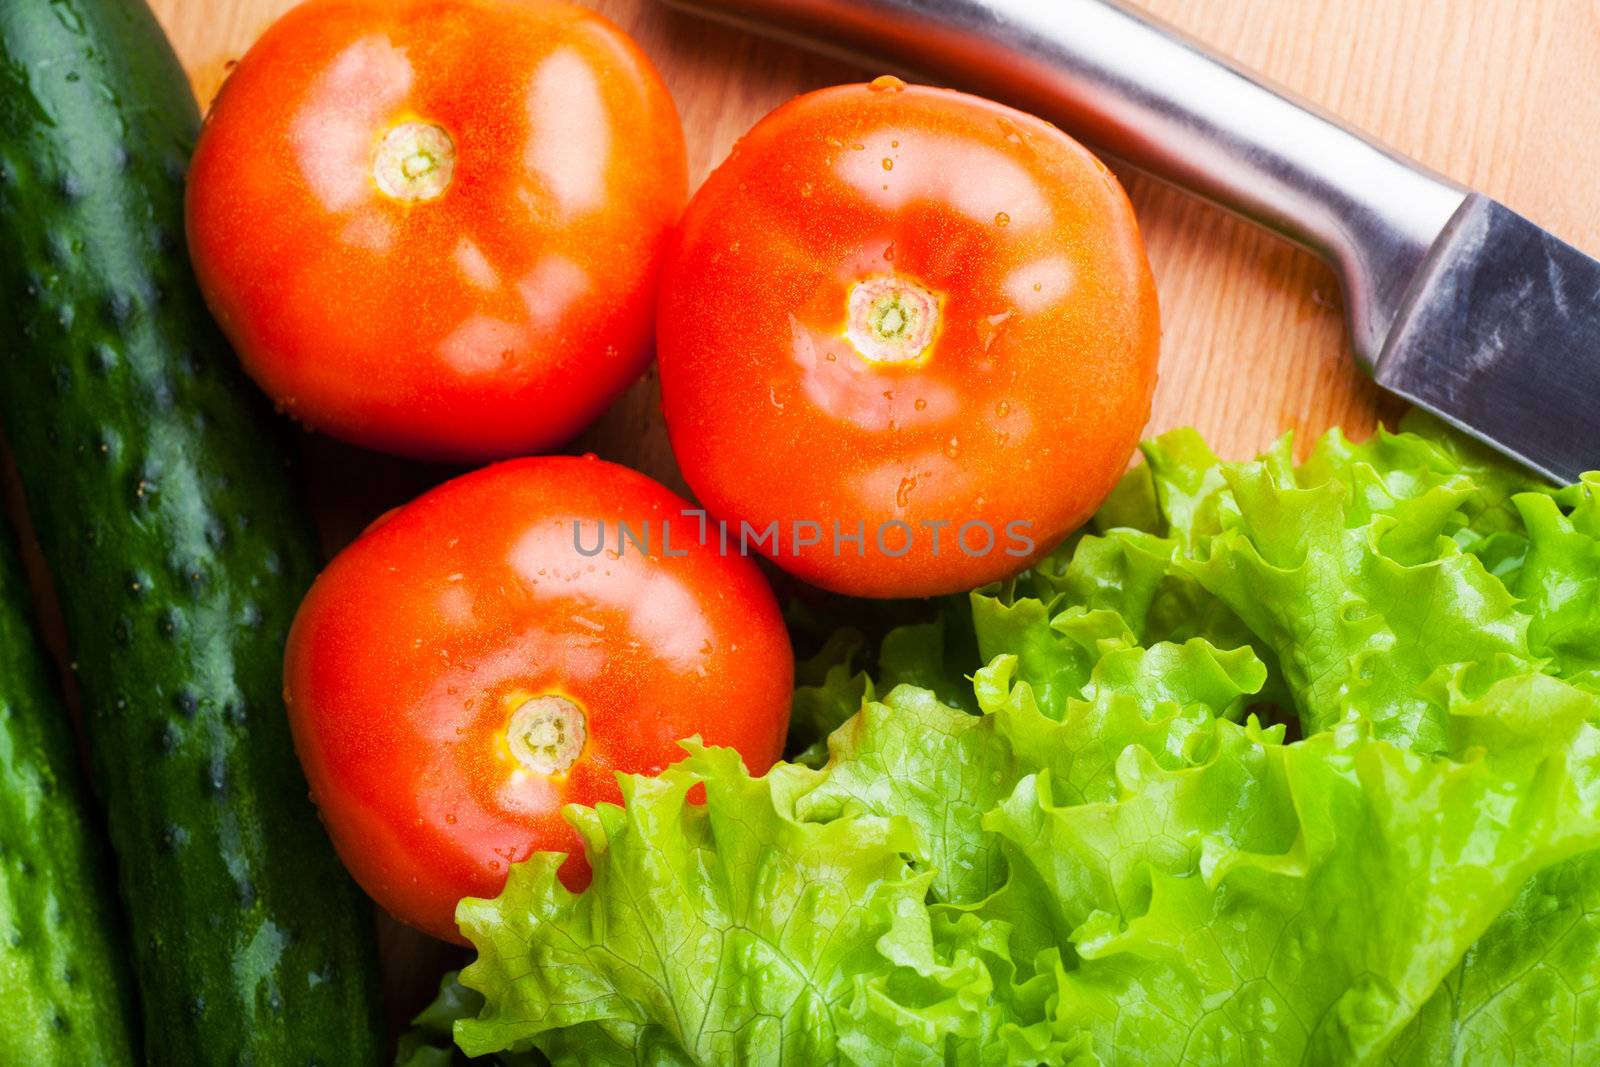 Vegetables (tomato, cucumber, salad) on a wooden table